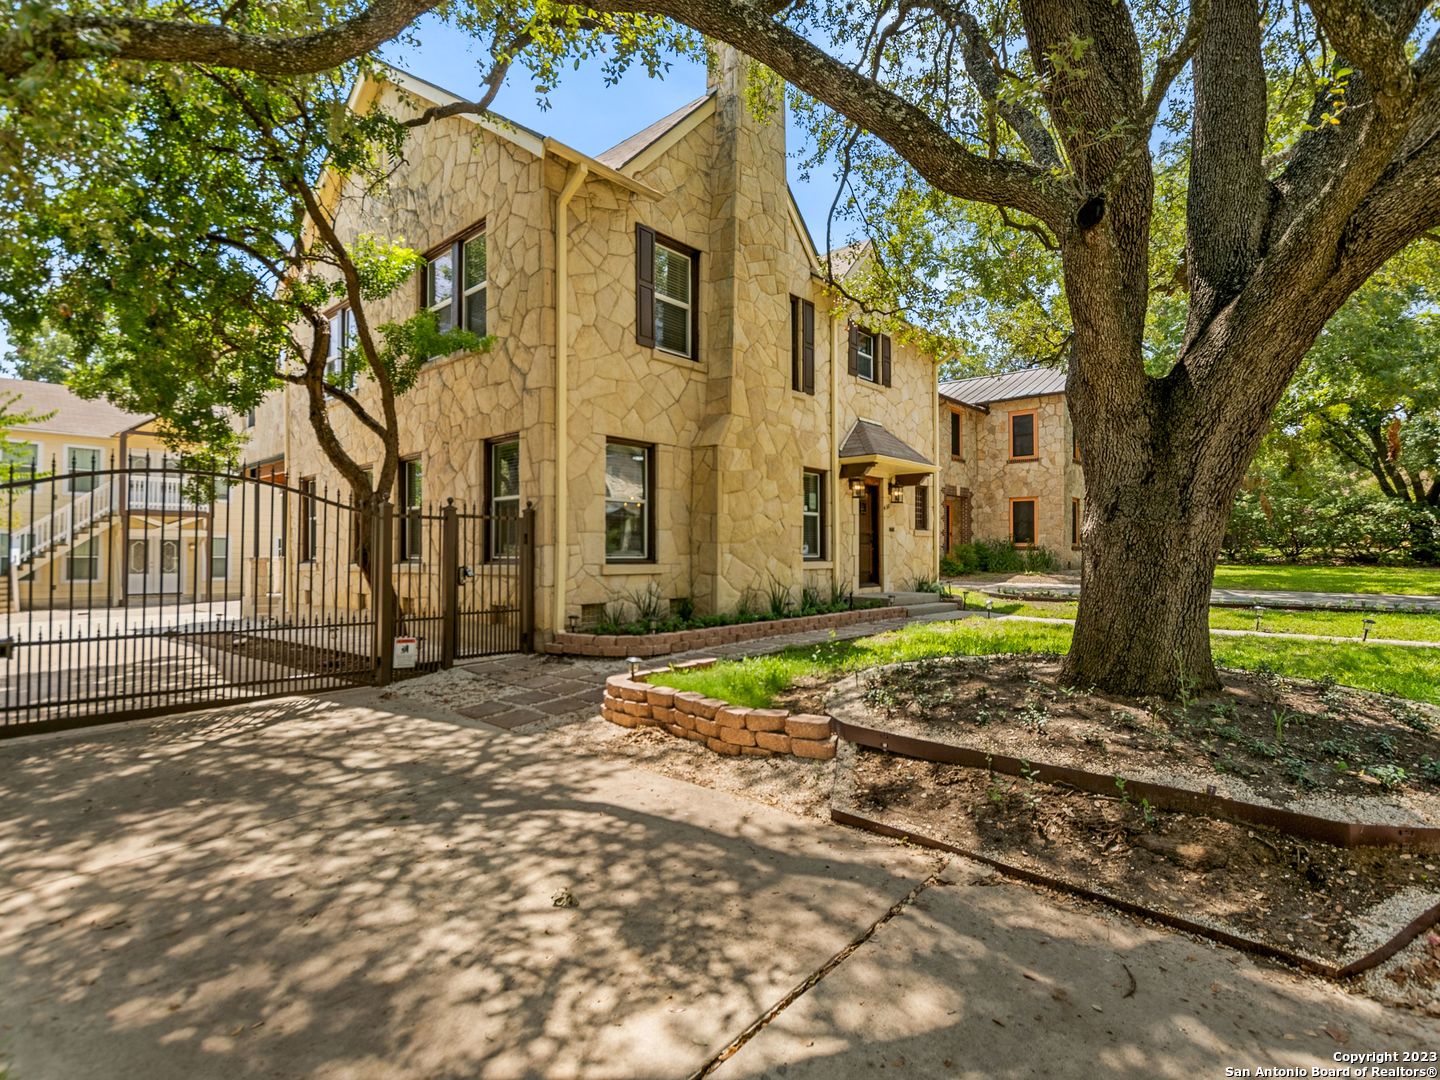 This H.C. Thorman-stone home has been exquisitely renovated. It seamlessly blends contemporary living with the charm of Olmos Park's historical ambiance. The house showcases an array of enhancements and modernizations, including a spacious, newly designed master suite and an updated master bathroom featuring luxurious rain head showers, a separate tub, double vanities, and energy-efficient windows that have been installed throughout the entire residence, the open-concept layout creates a sense of spaciousness, while the electrical  system has been completely updated, remote-controlled security gates, wireless thermostats, and a remodeled, chef-inspired kitchen boasting stainless steel appliances, quartz countertops, and ample cabinet space. Additionally, a new HVAC system has been installed for your comfort. Beyond the main house, there are two guest suites located in a separate structure at the rear of the property, providing versatile spaces ideal for hosting guests, establishing a home office, or setting up a personal gym. A magnificent mature oak tree graces the front yard, while the backyard features a low-maintenance xeriscape design. This residence falls within the Alamo Heights Independent School District and benefits from convenient access to a nearby bus stop. Enjoy easy proximity to a variety of dining and shopping options, making this property the perfect blend of modern convenience and classic elegance in Olmos Park.